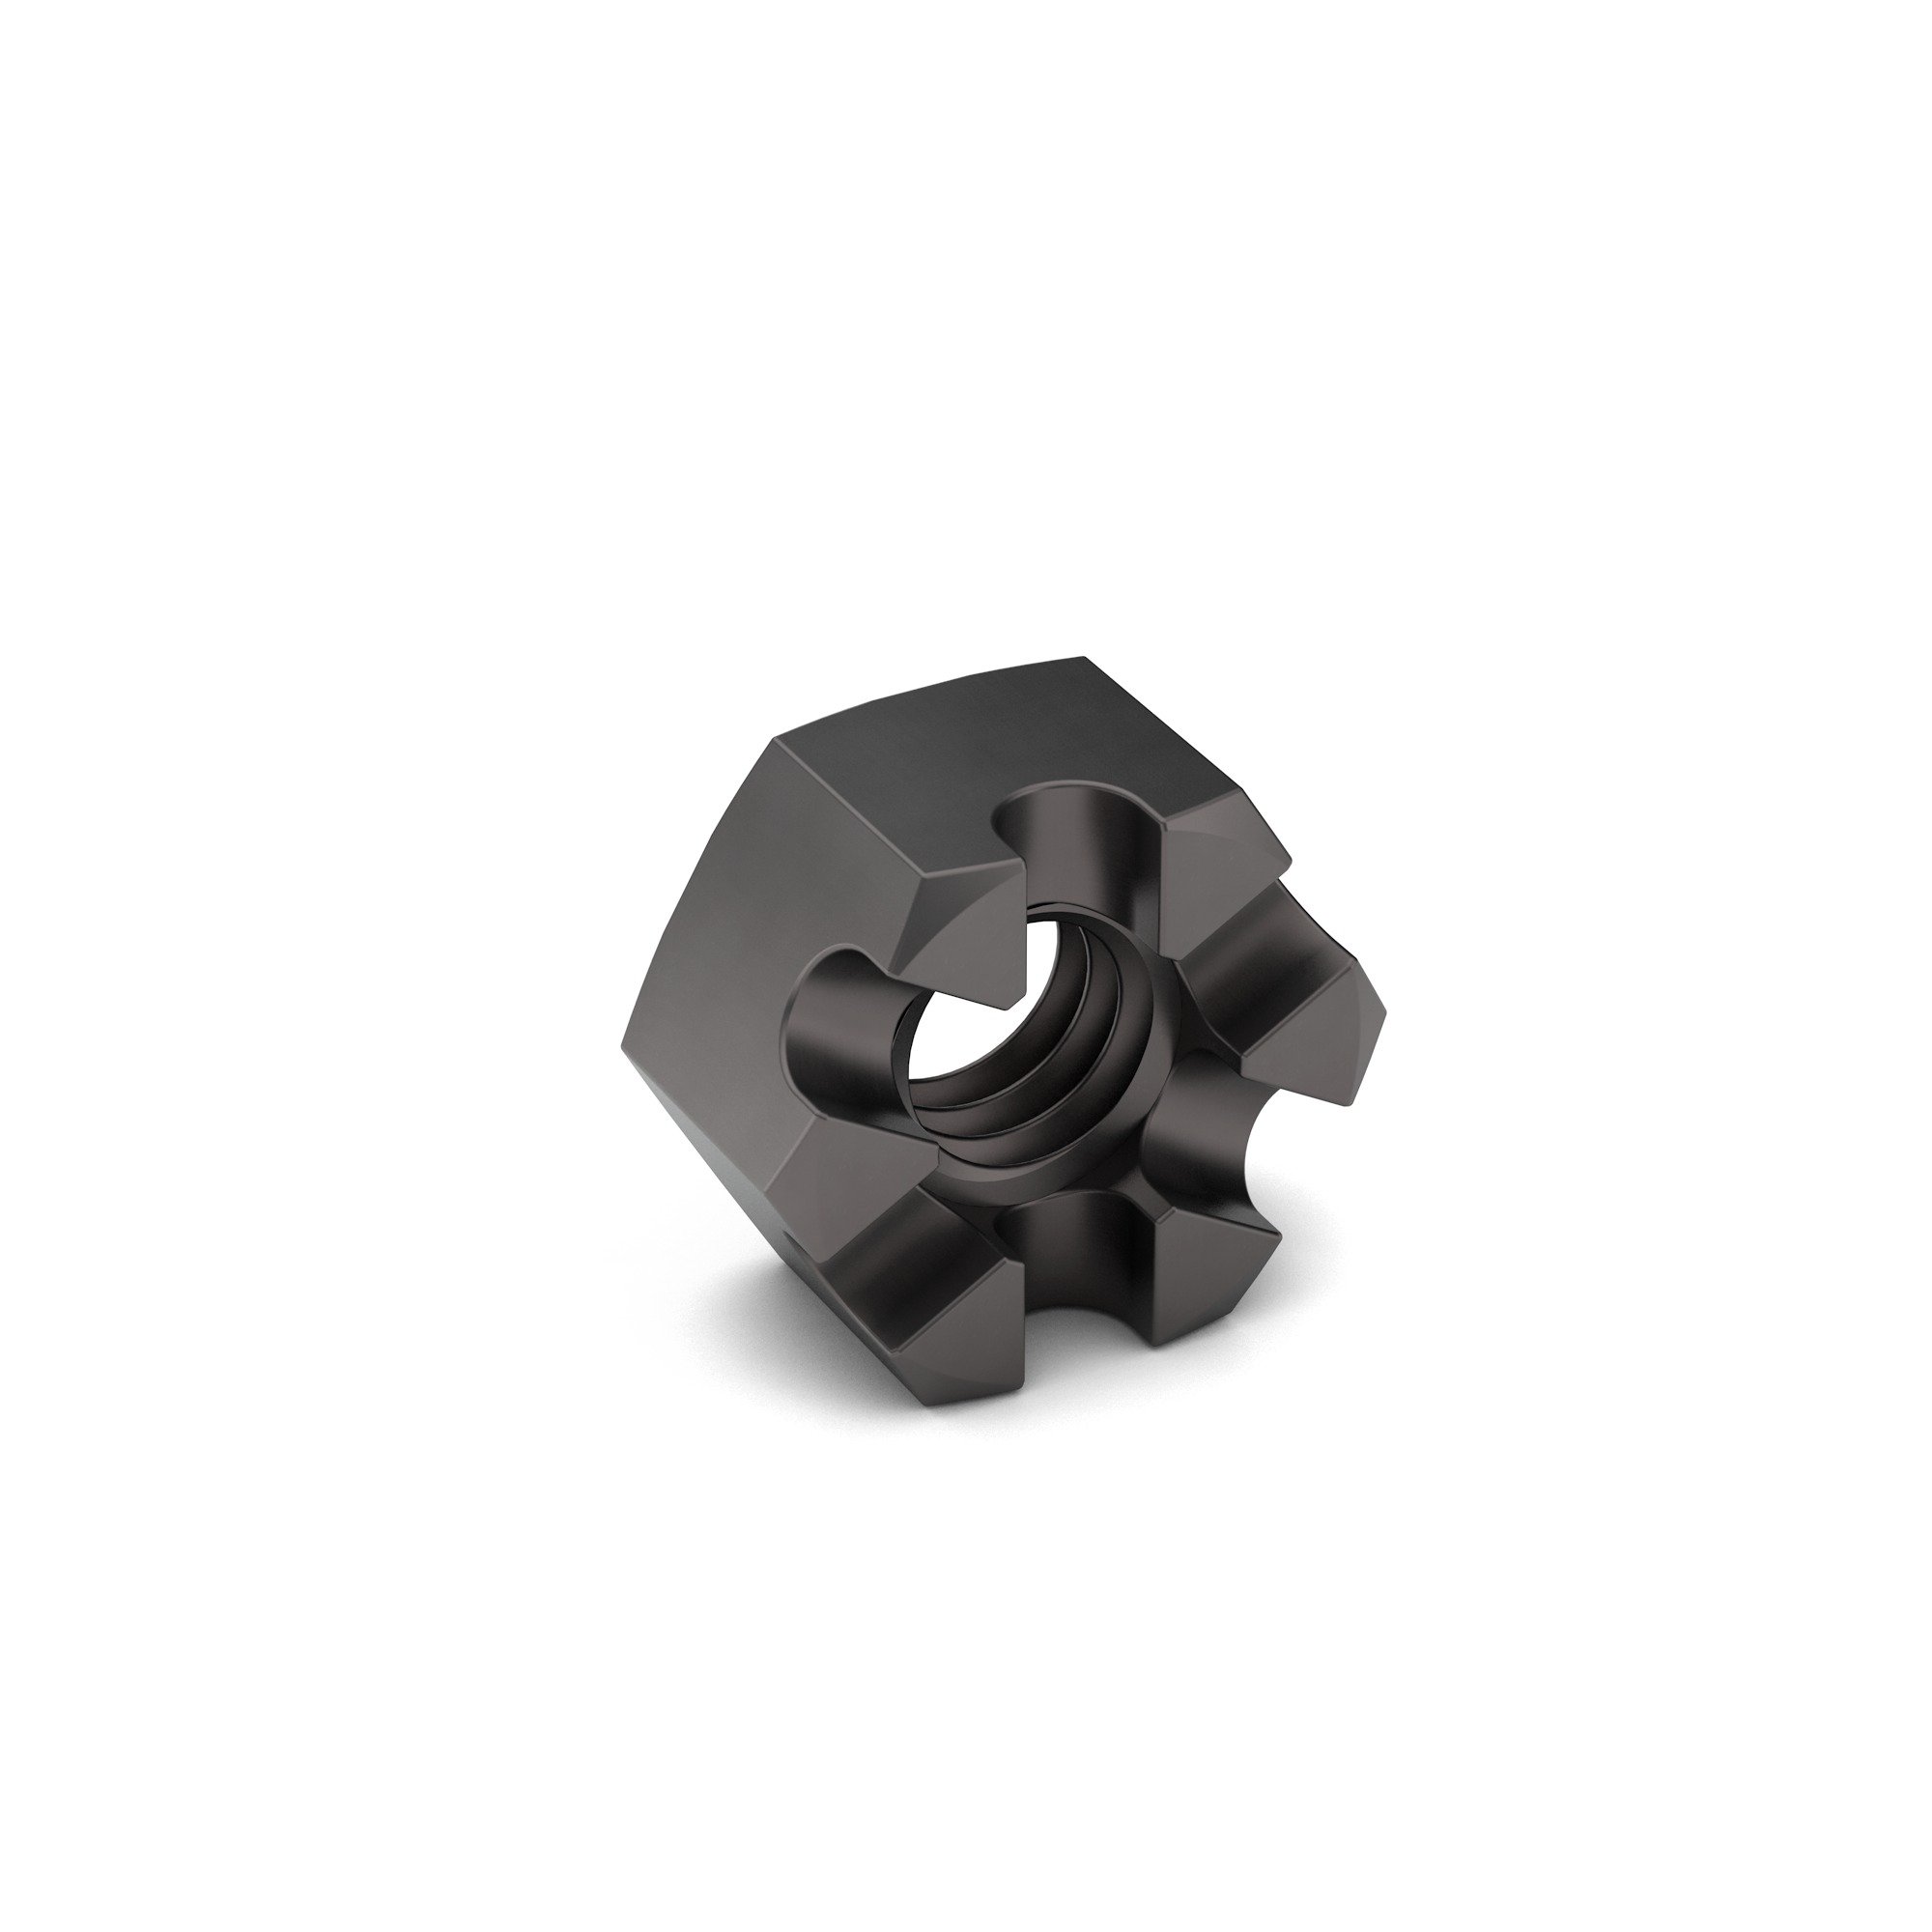 1 1/4-7 Carbon Steel Slotted Hex Nut Plain Finish